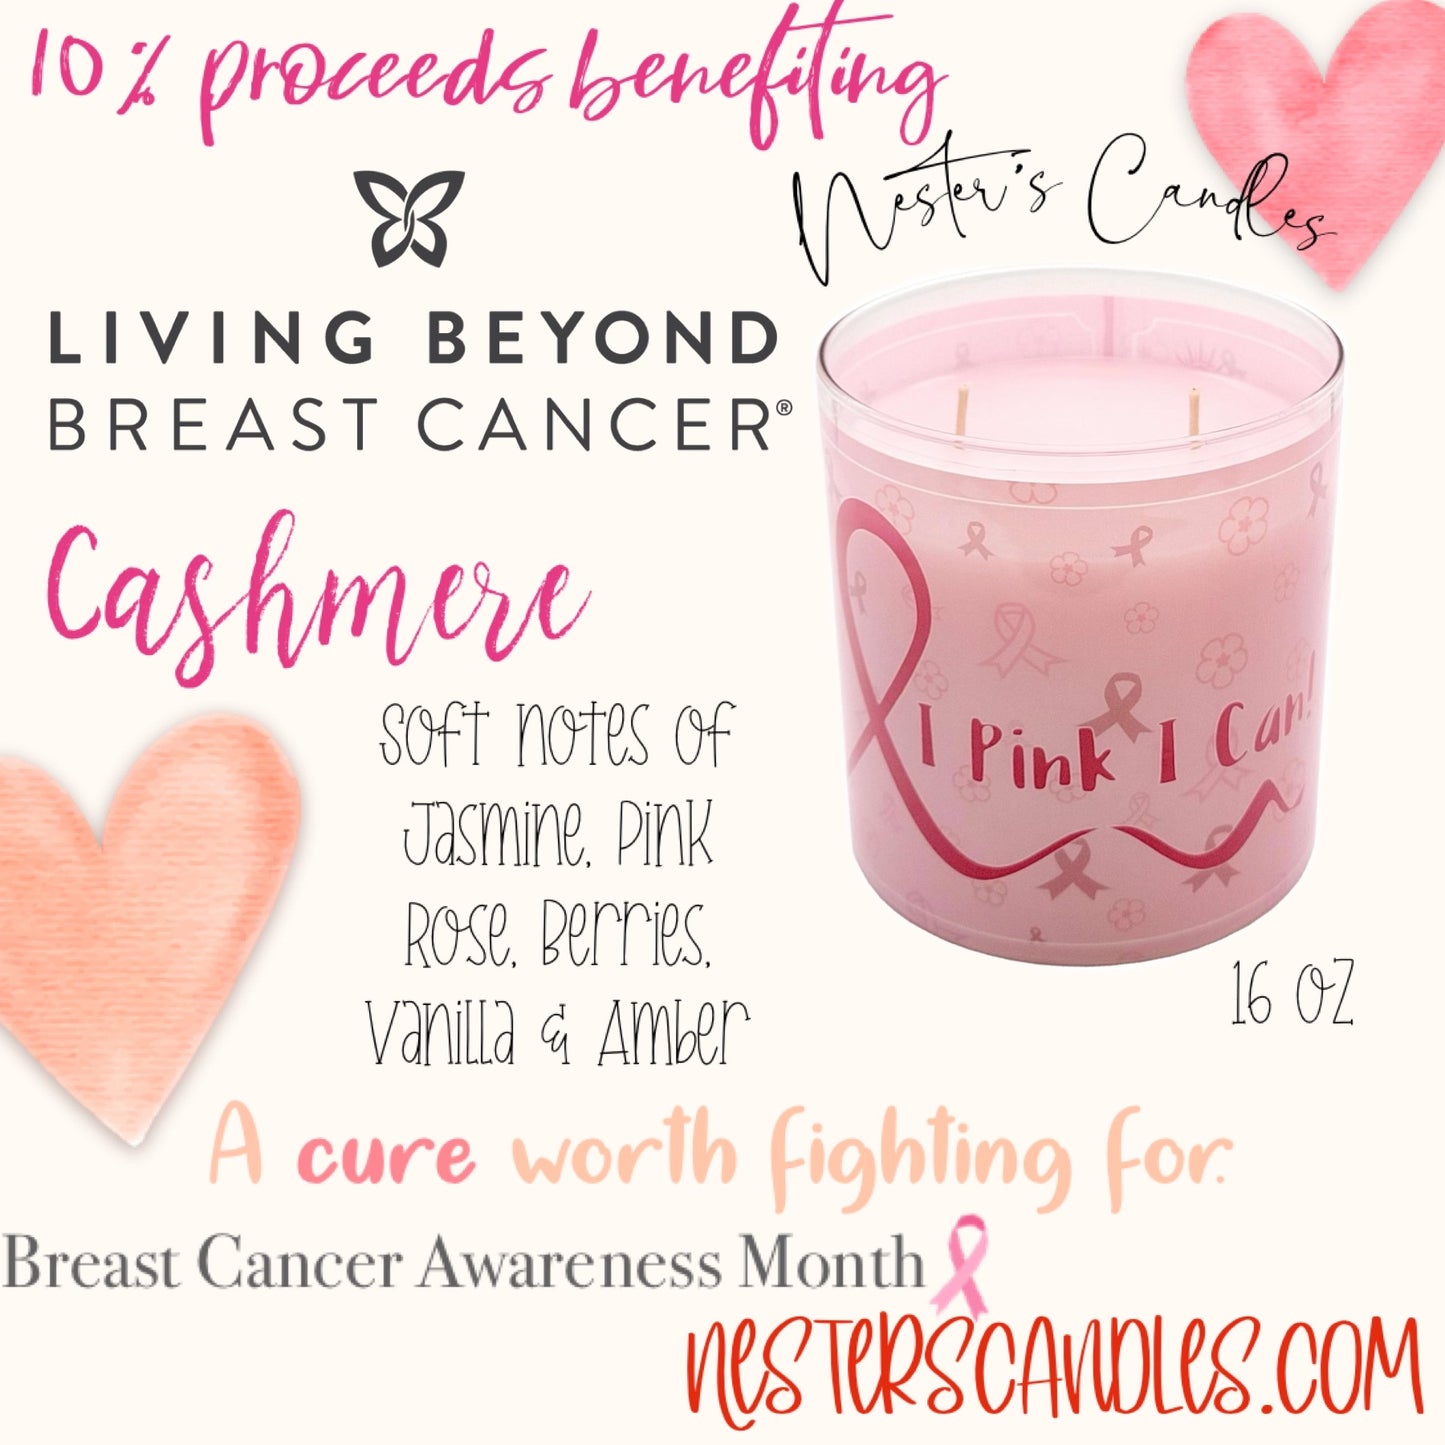 Cashmere - Breast Cancer Awareness Month